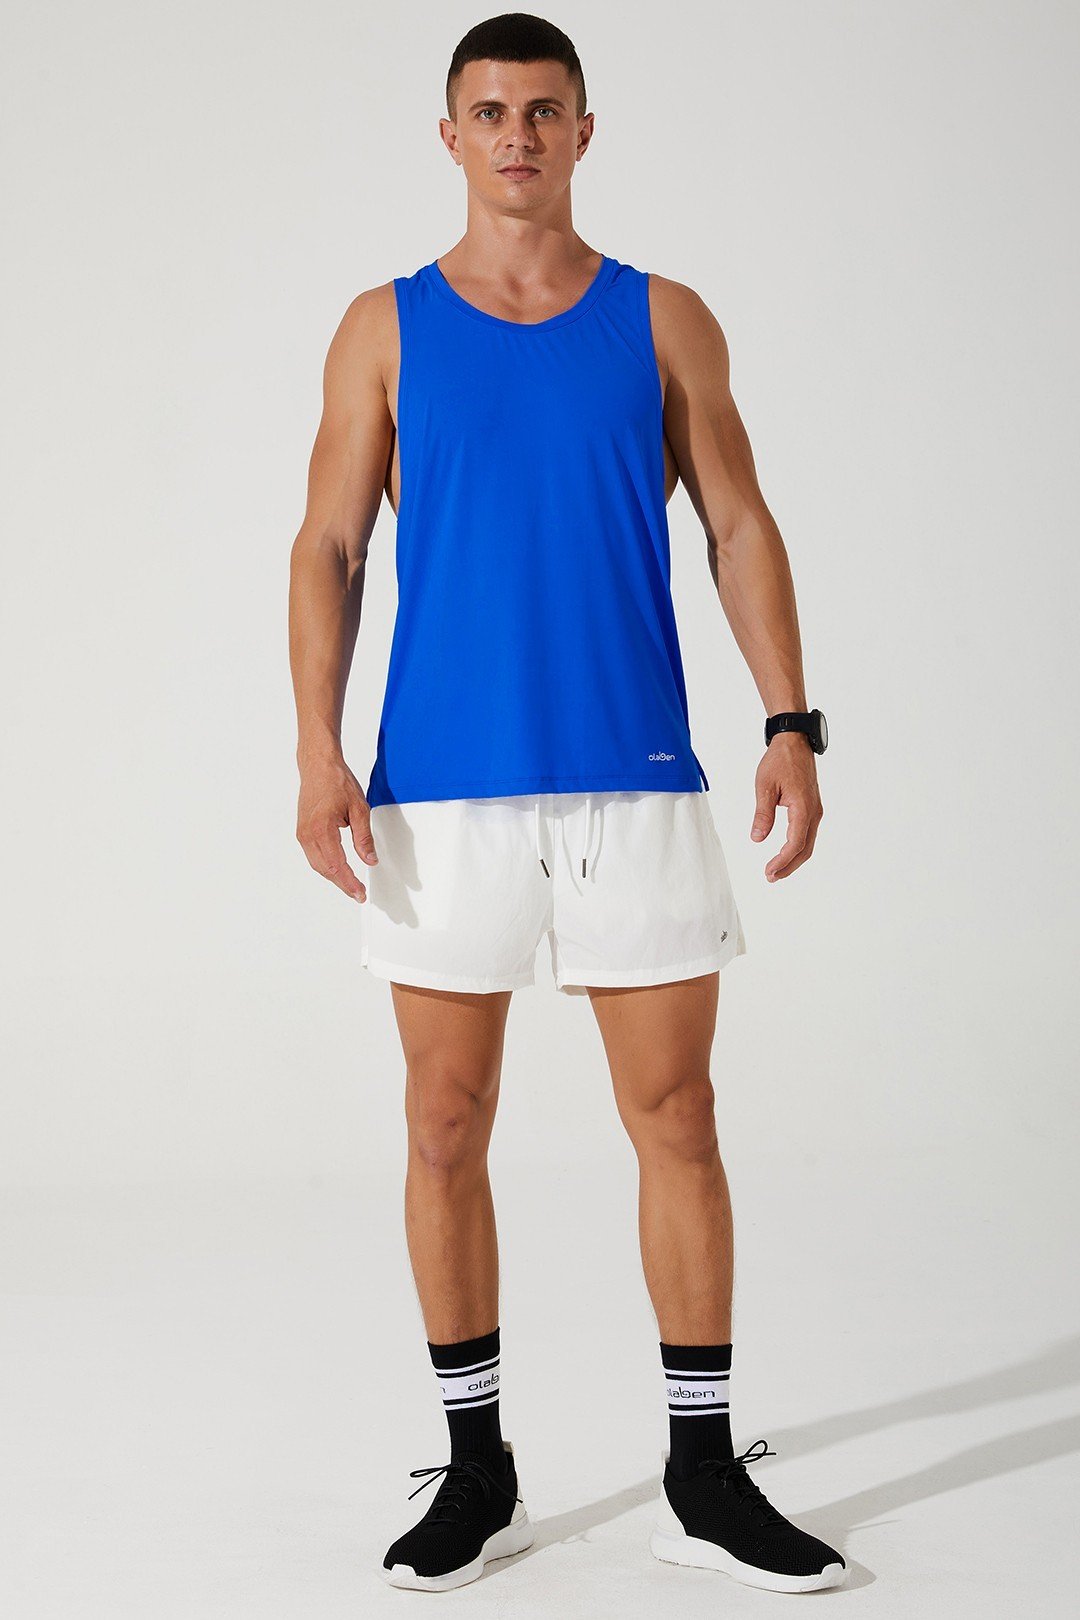 Blue tank top for men by Ricard Tank, style OW-0027-MTT-BL, in size medium.